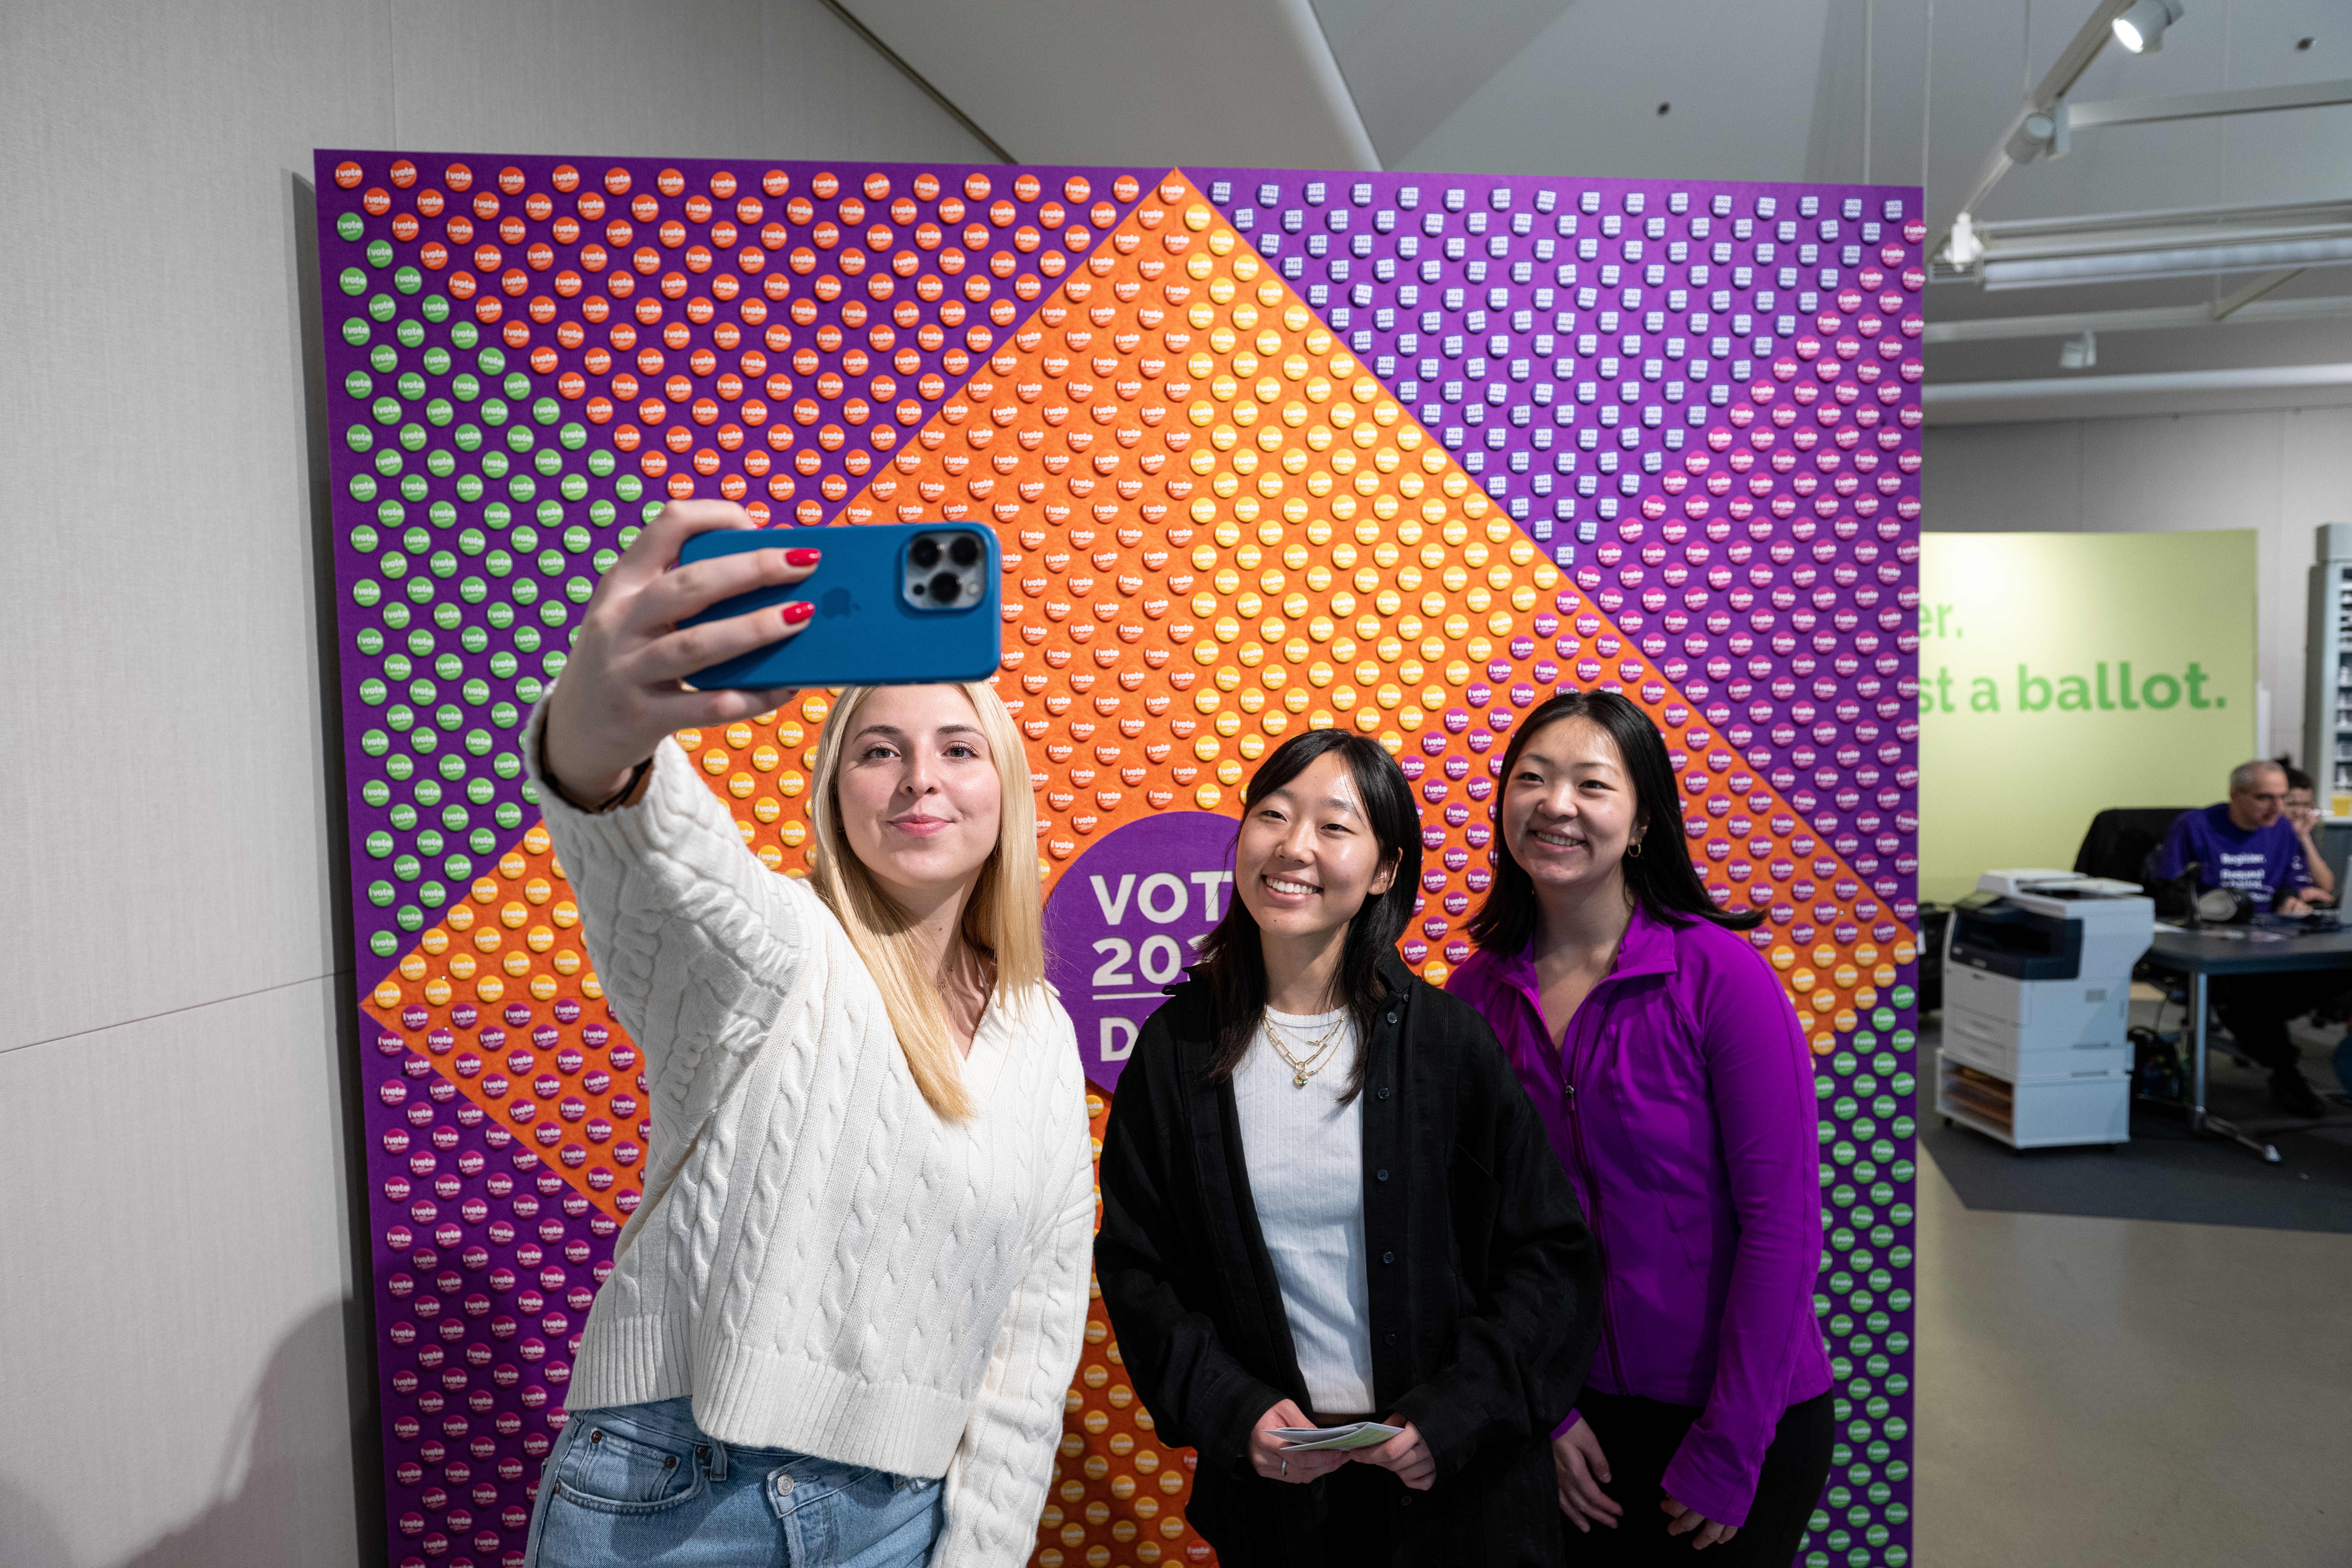 Students take a selfie at a voting promotion event